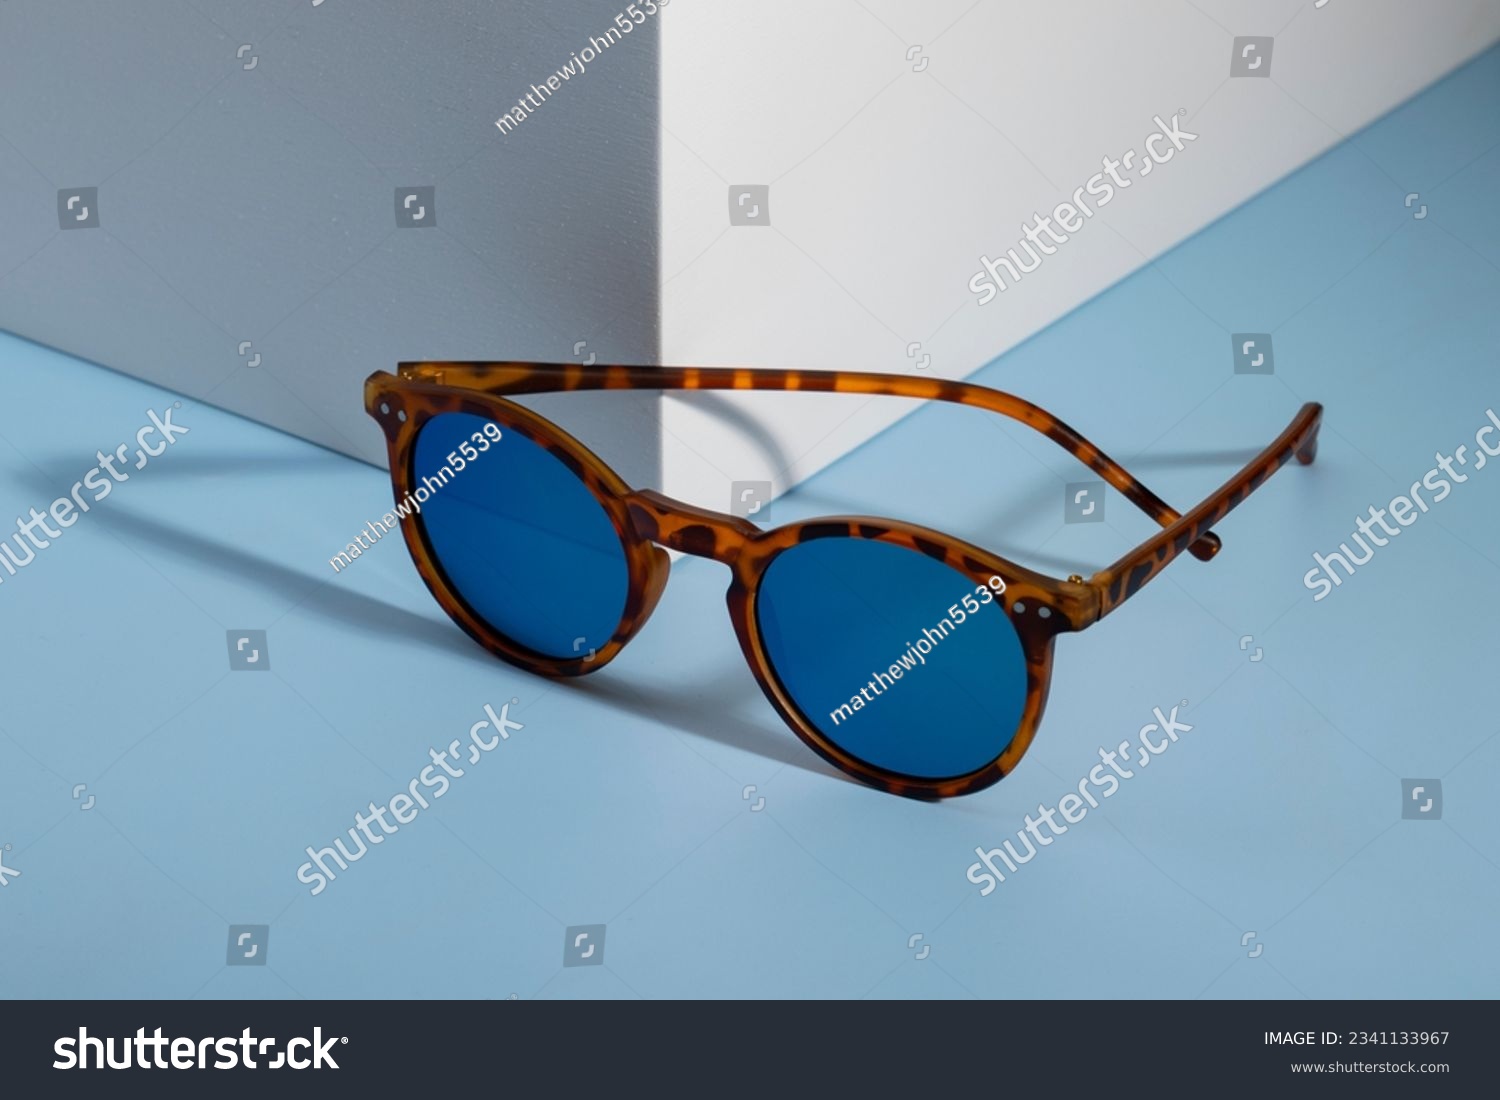 Sunglasses and glasses sale concept. Trendy sunglasses background. Trendy Fashion summer accessories. Copy space for text. Summer sale. Optic store discount poster. glasses with rounded frames. #2341133967